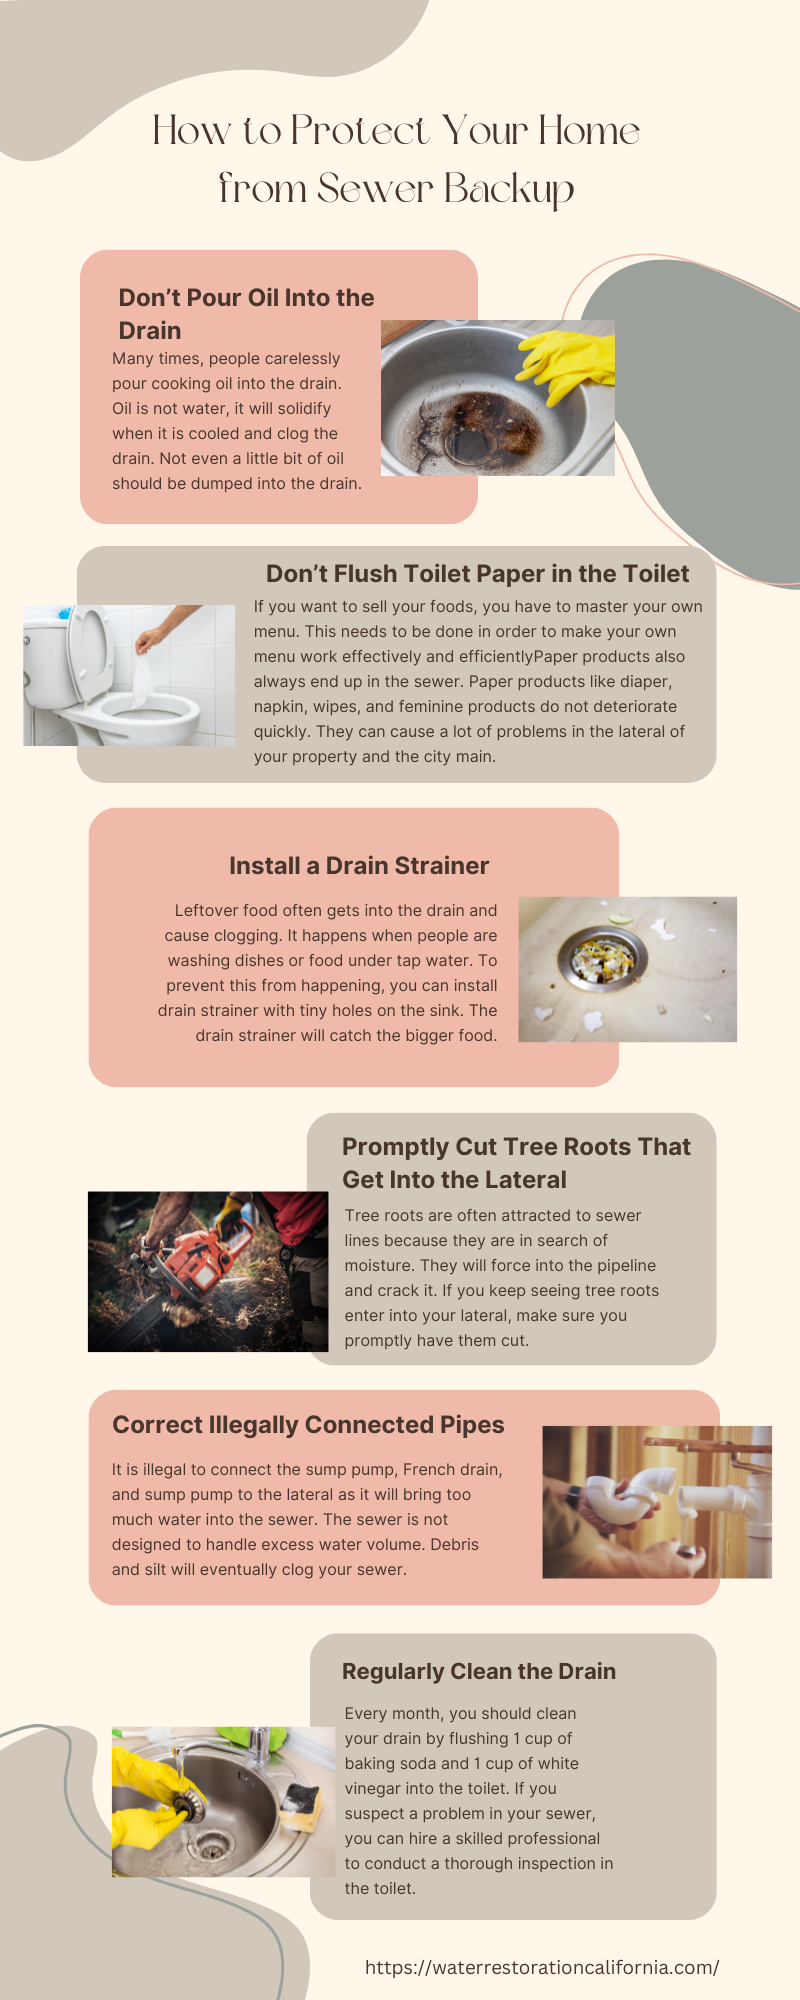 How to Protect Your Home from Sewer Backup